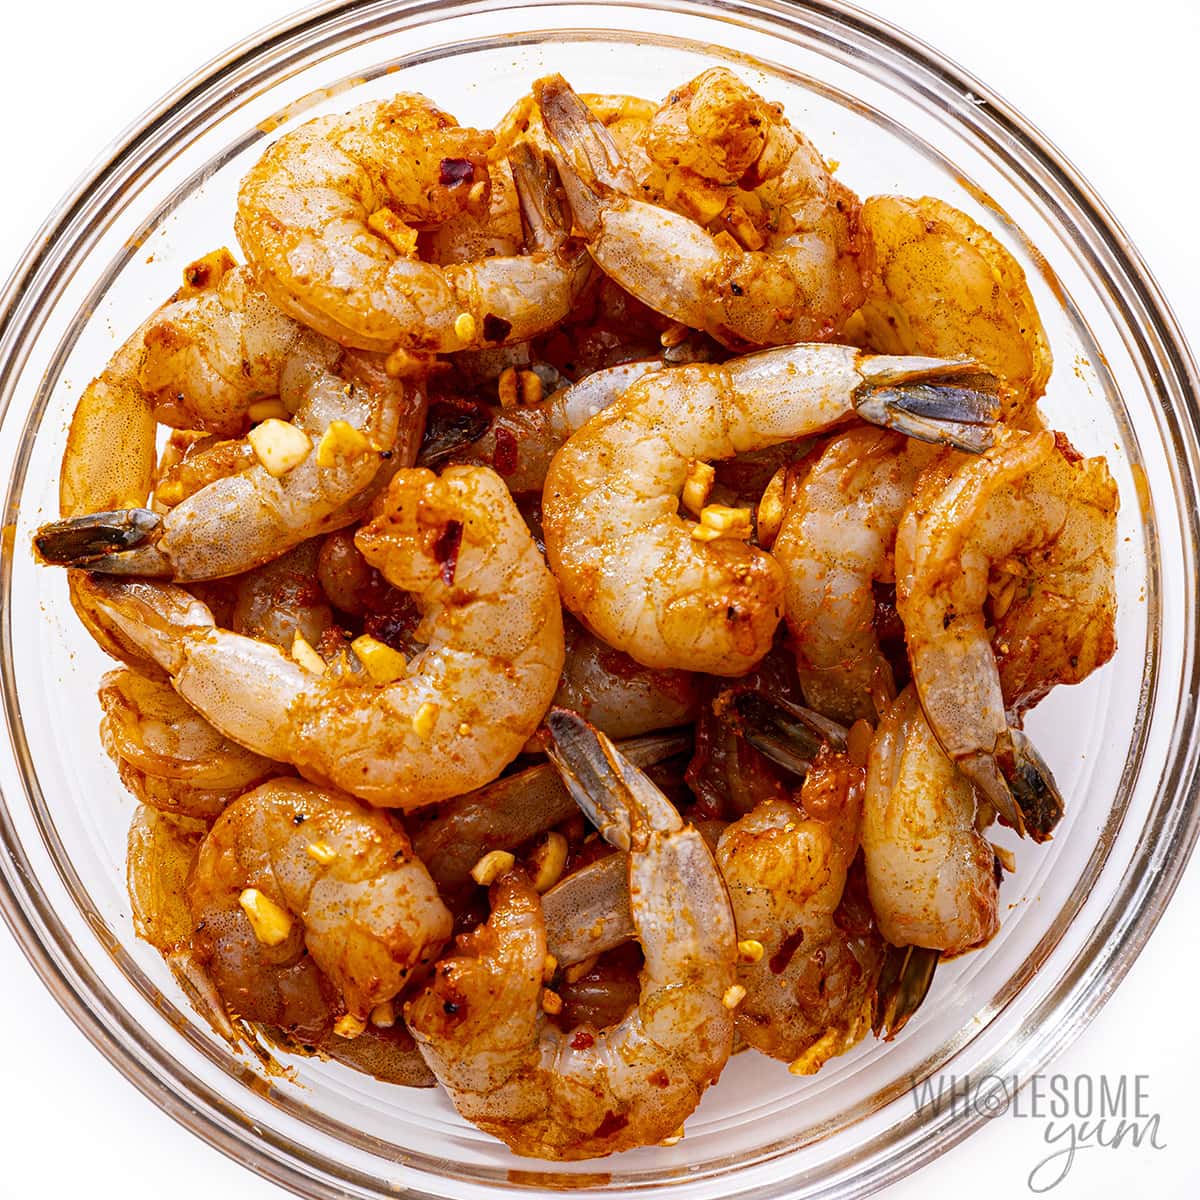 Shrimp coated with spices in a bowl.